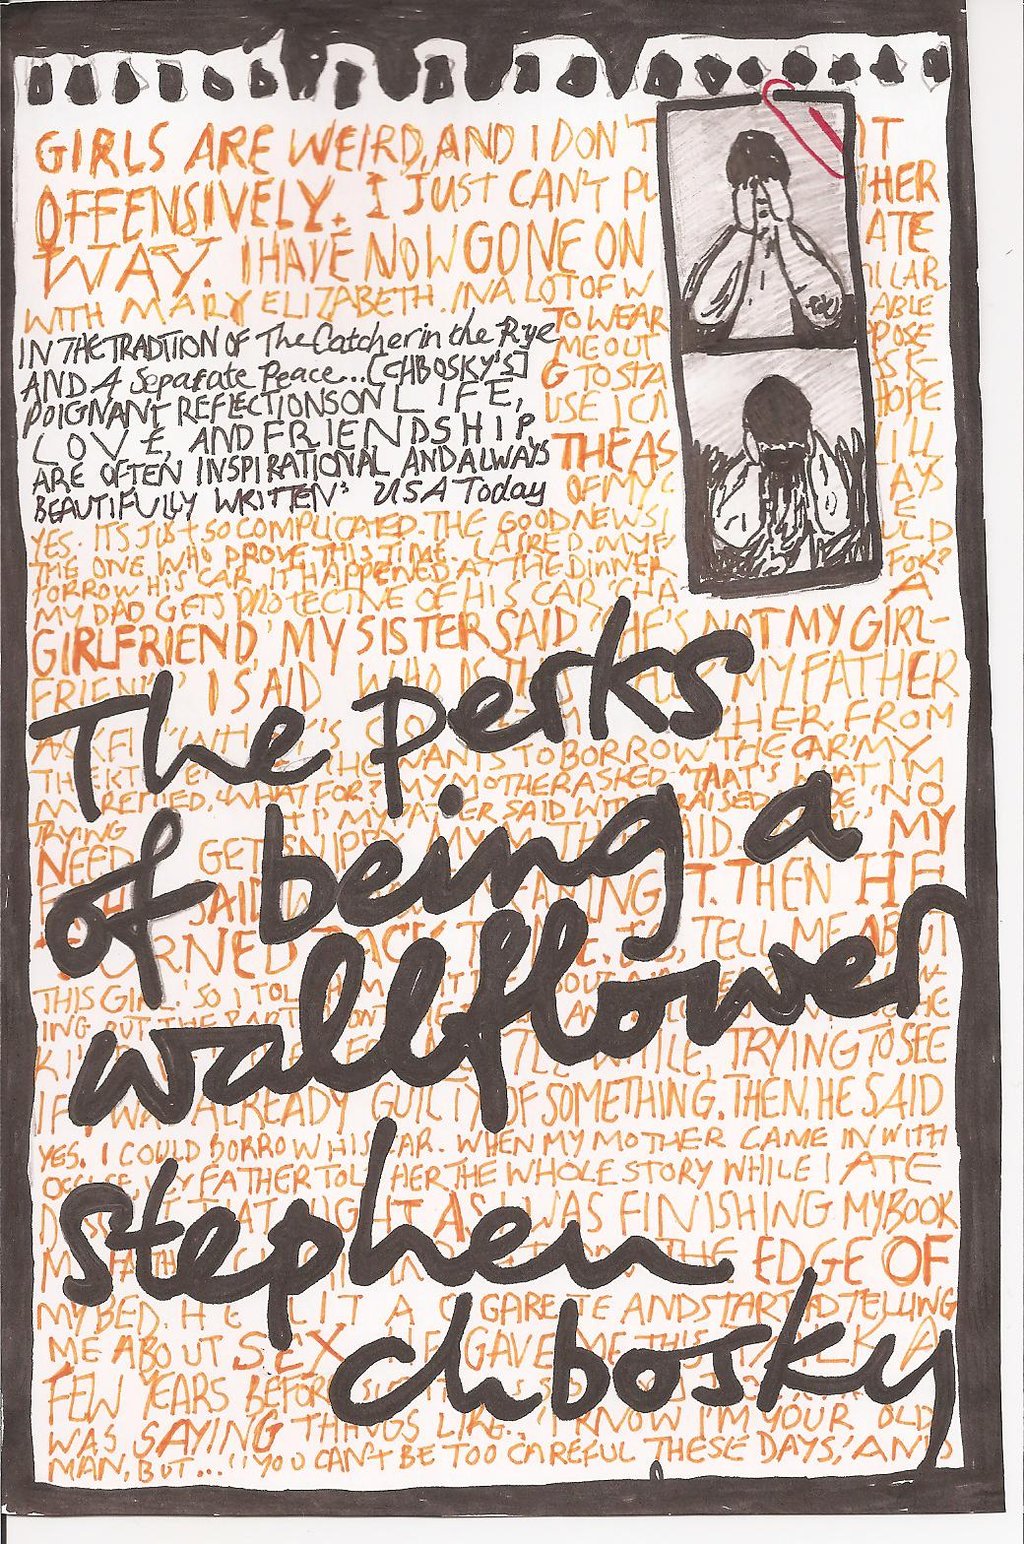 the perks of being a wallflower stephen chbosky 1999